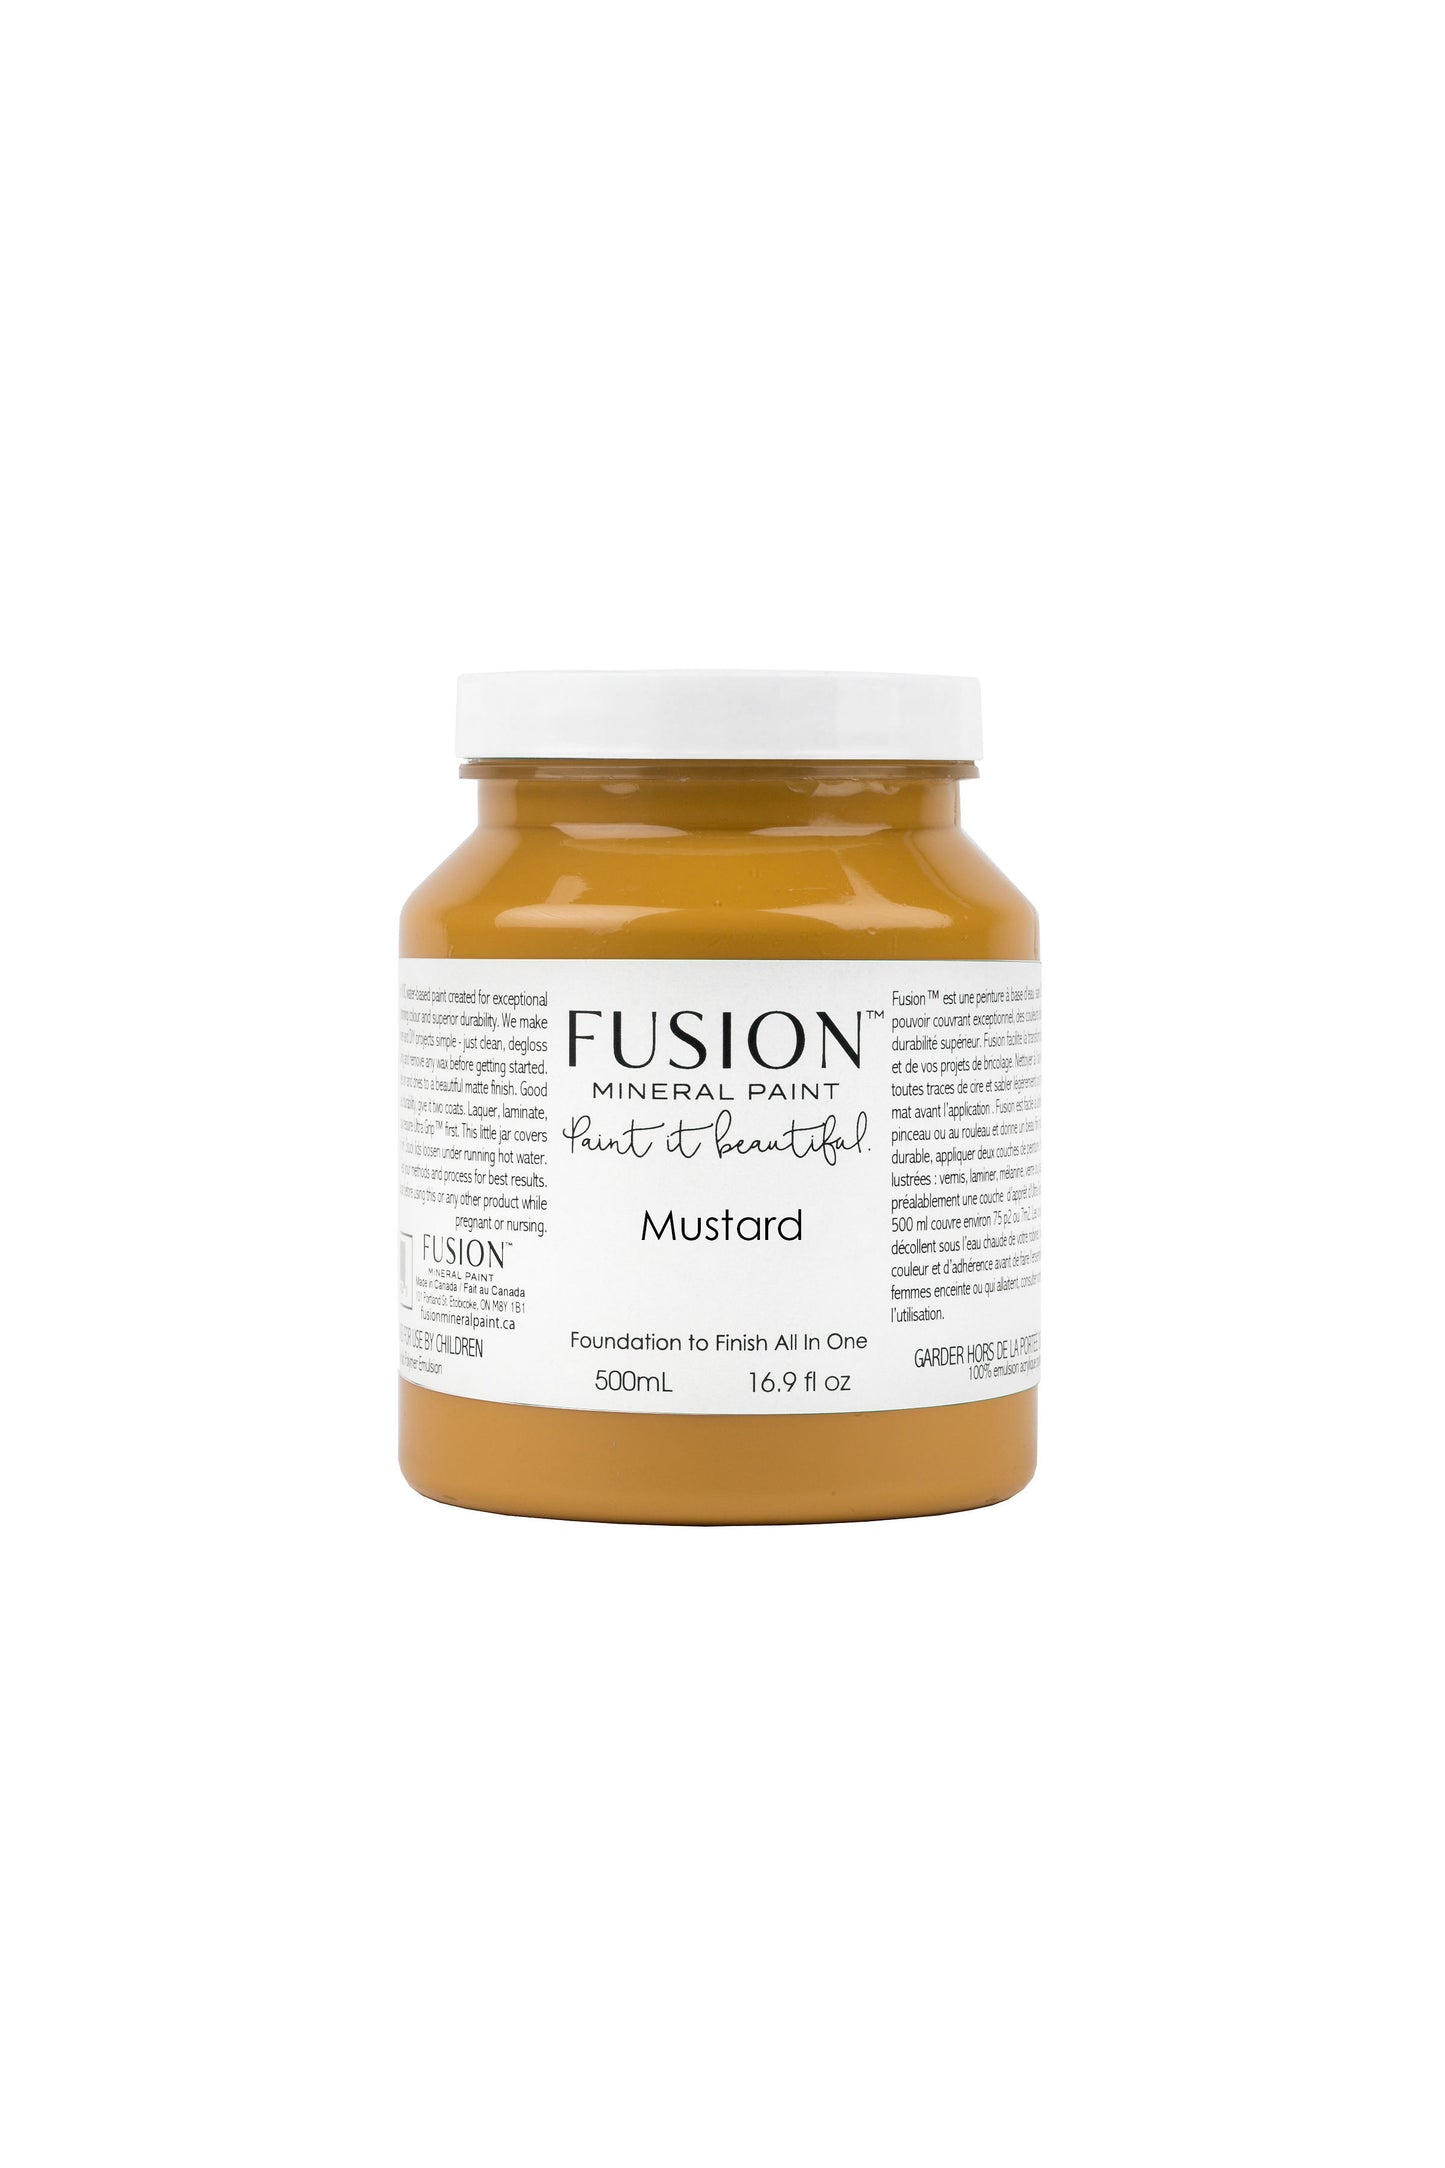 Mustard  Fusion Mineral Paint, Muted Yellow Paint Color| 500ml Pint Size